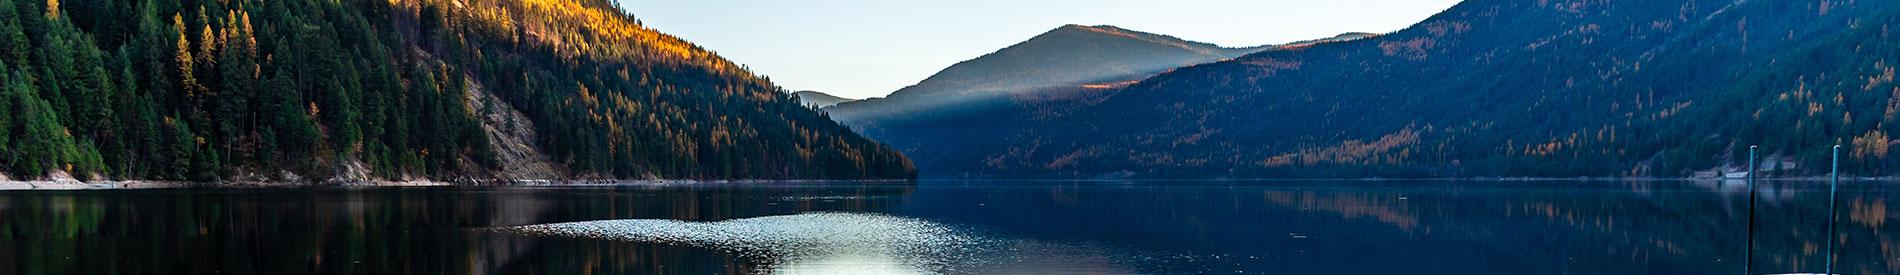 Sullivan Lake in the Colville National Forest